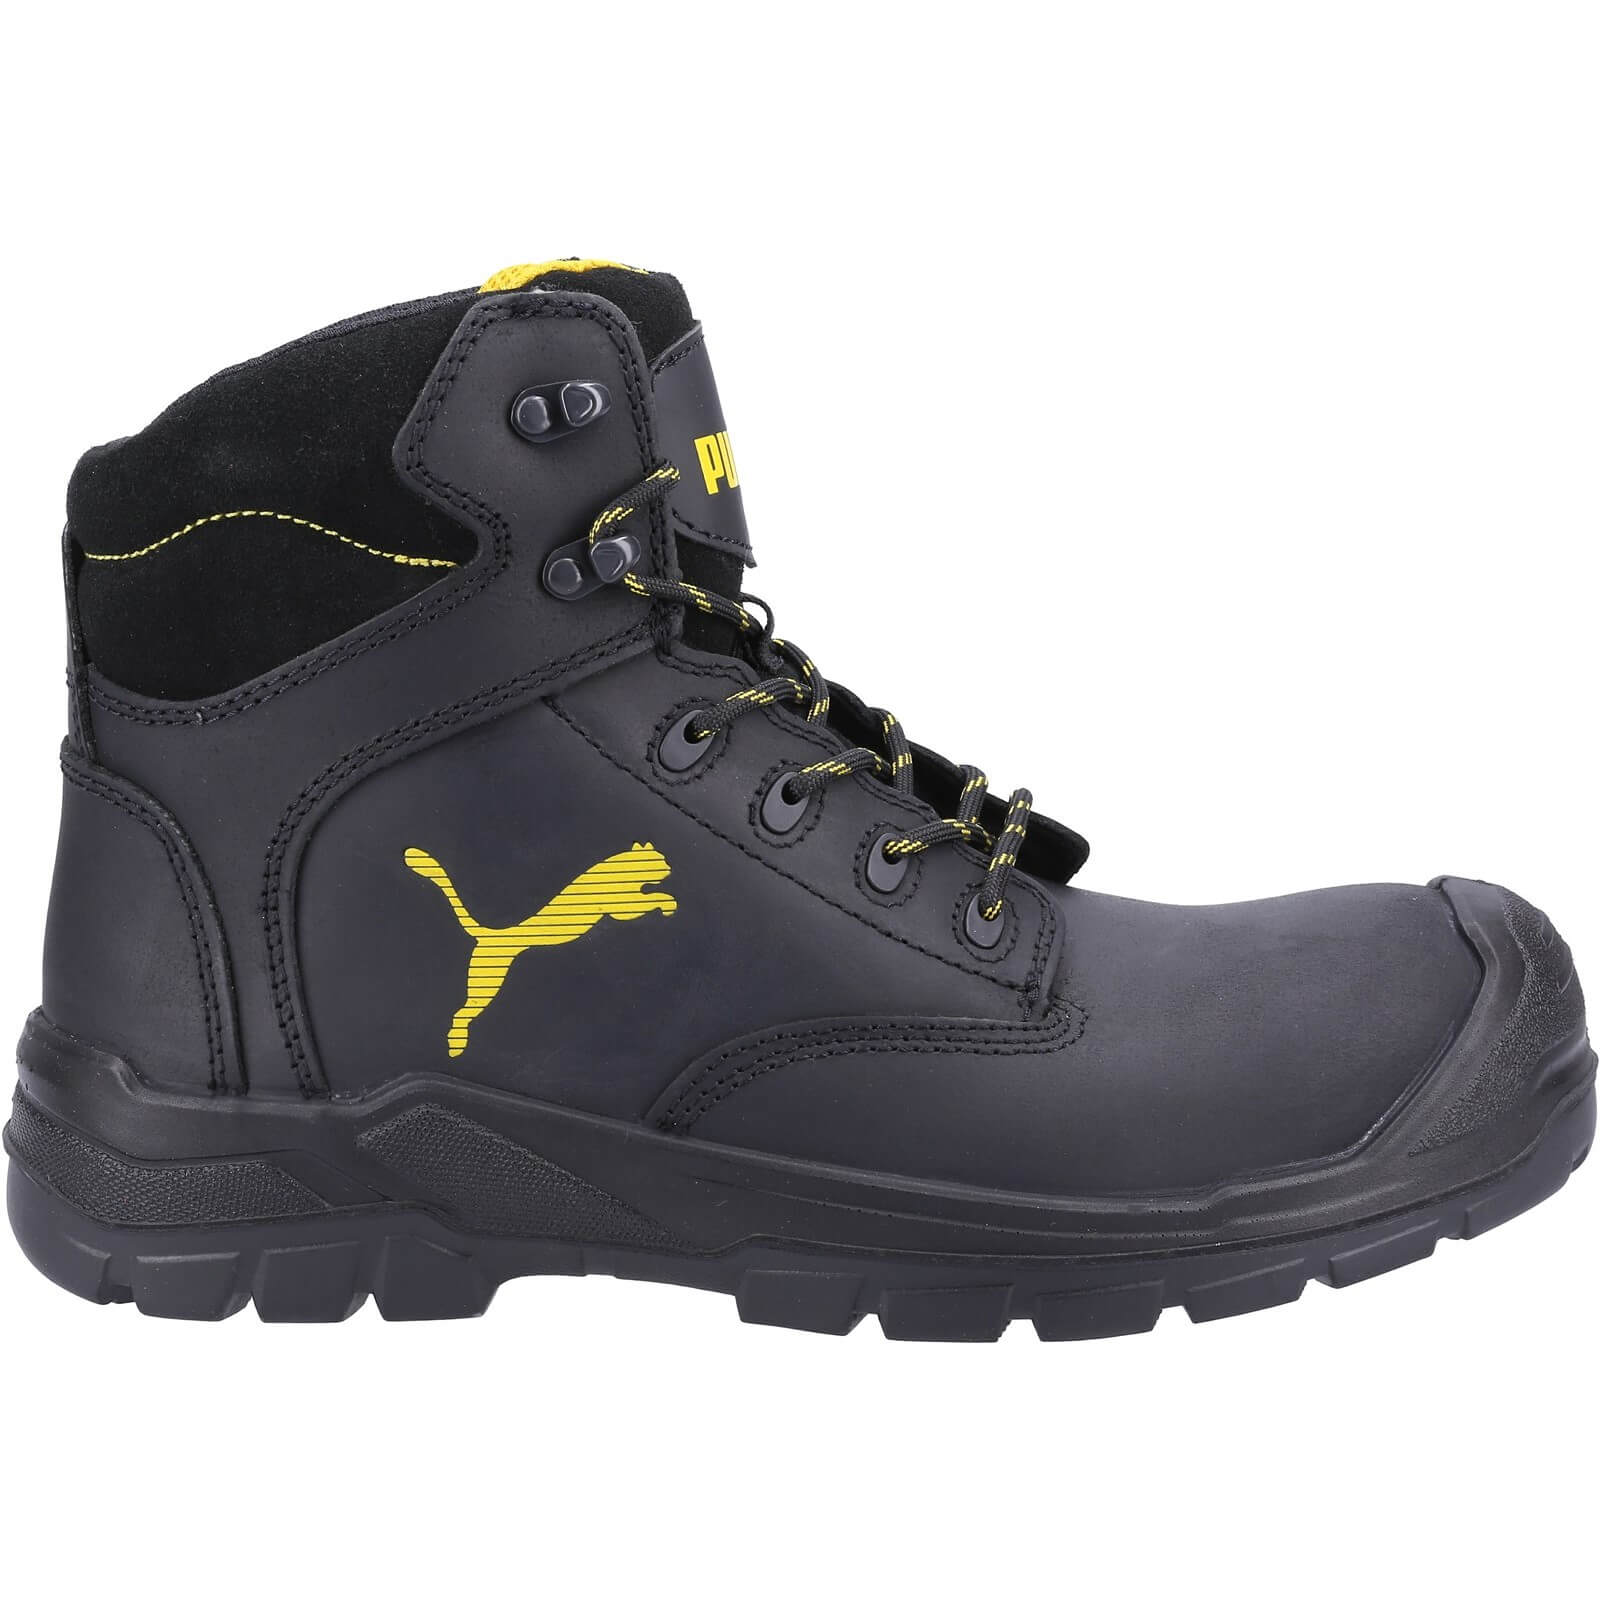 Puma Safety Borneo Mid S3 Safety Boots –